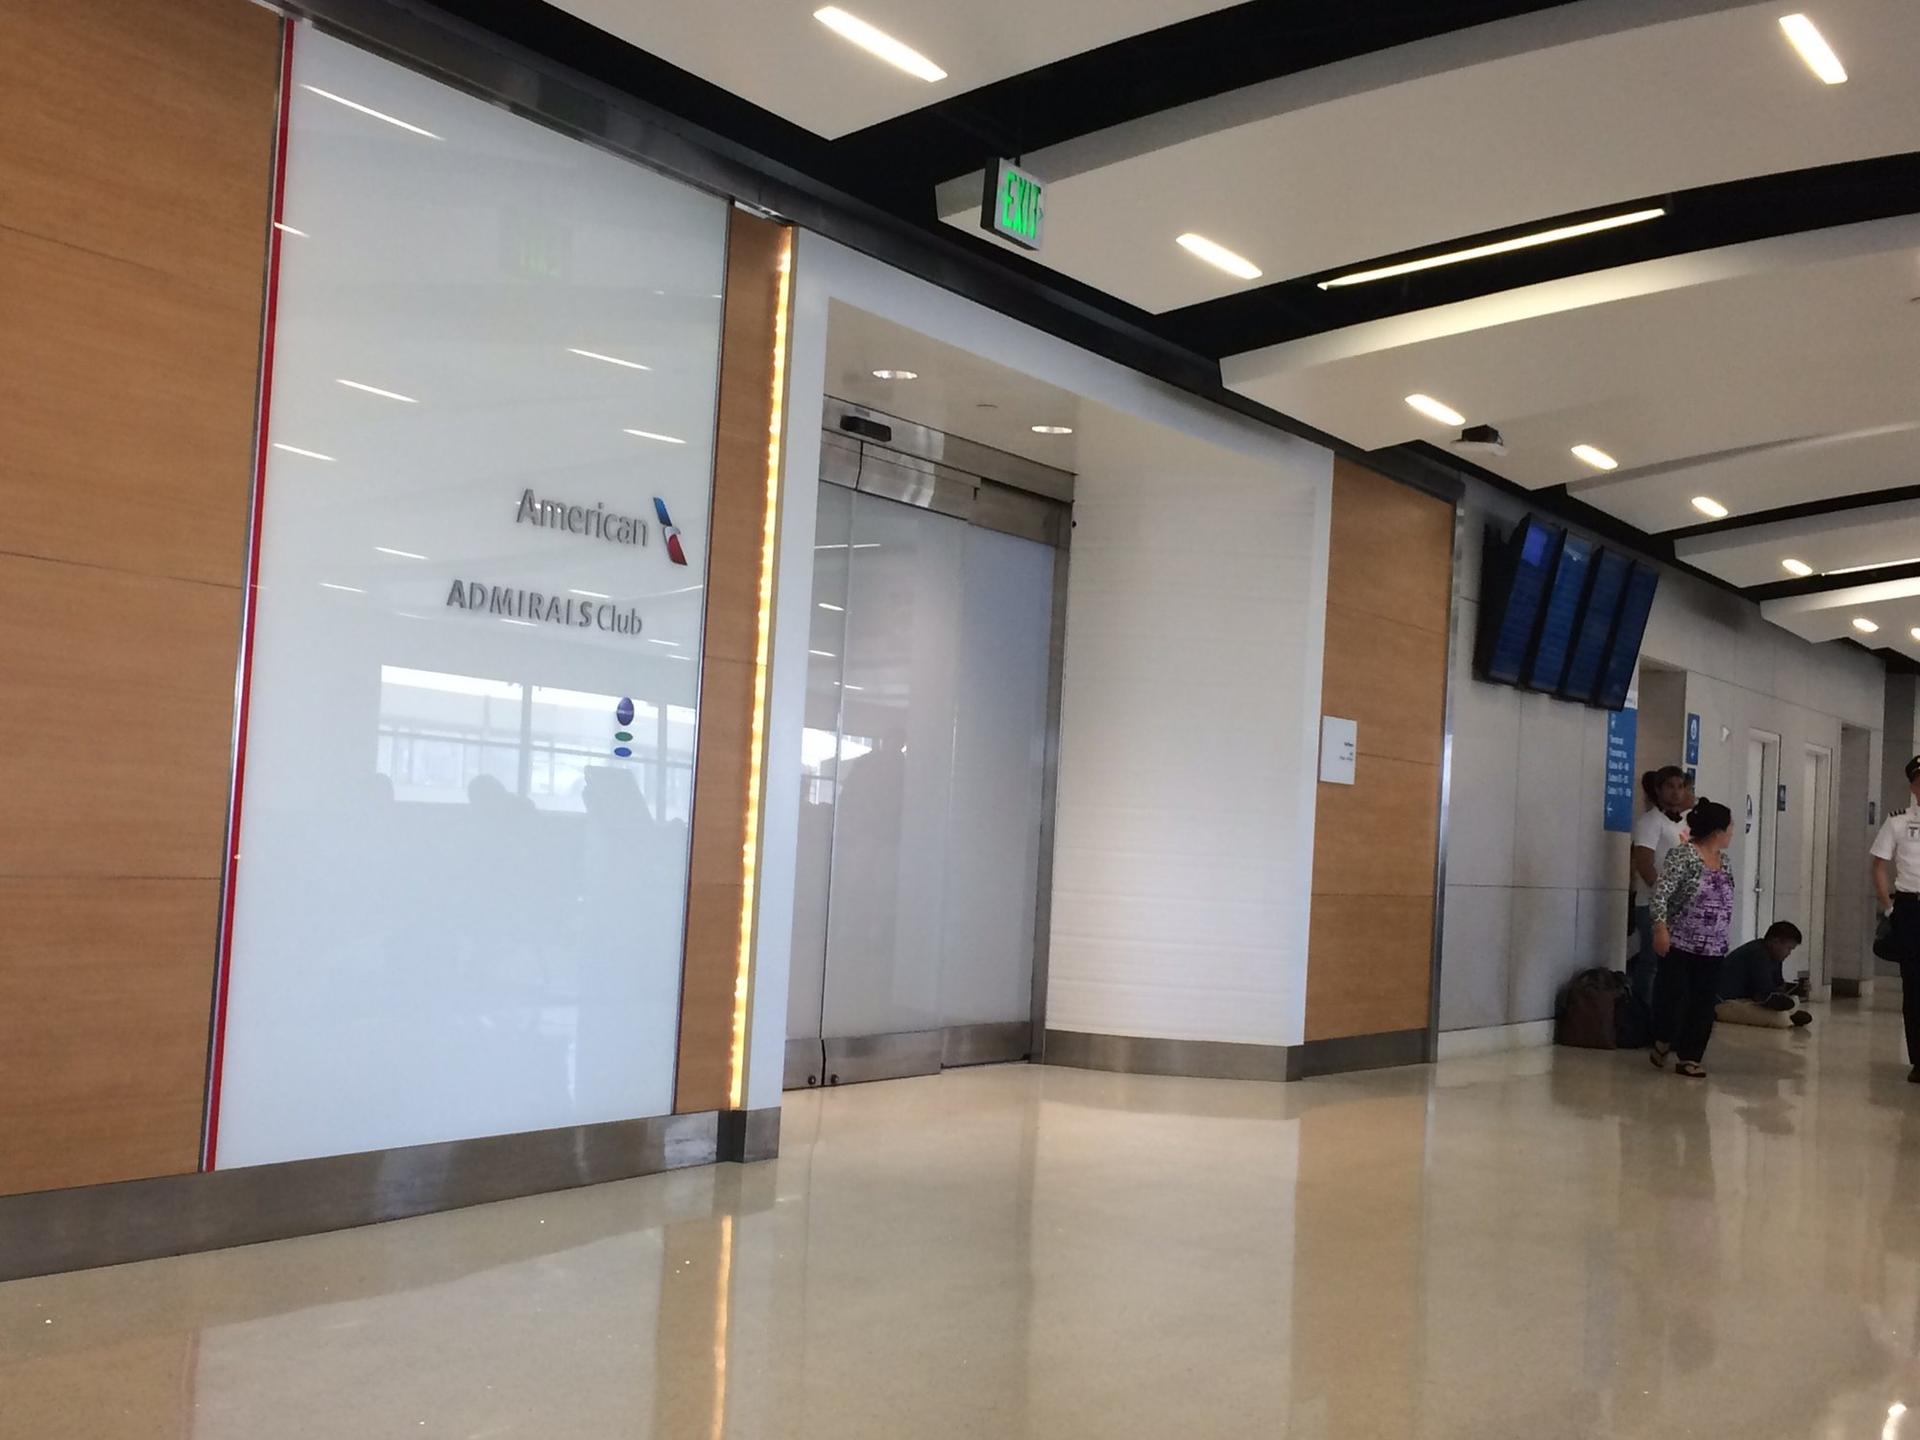 American Airlines Admirals Club image 19 of 43